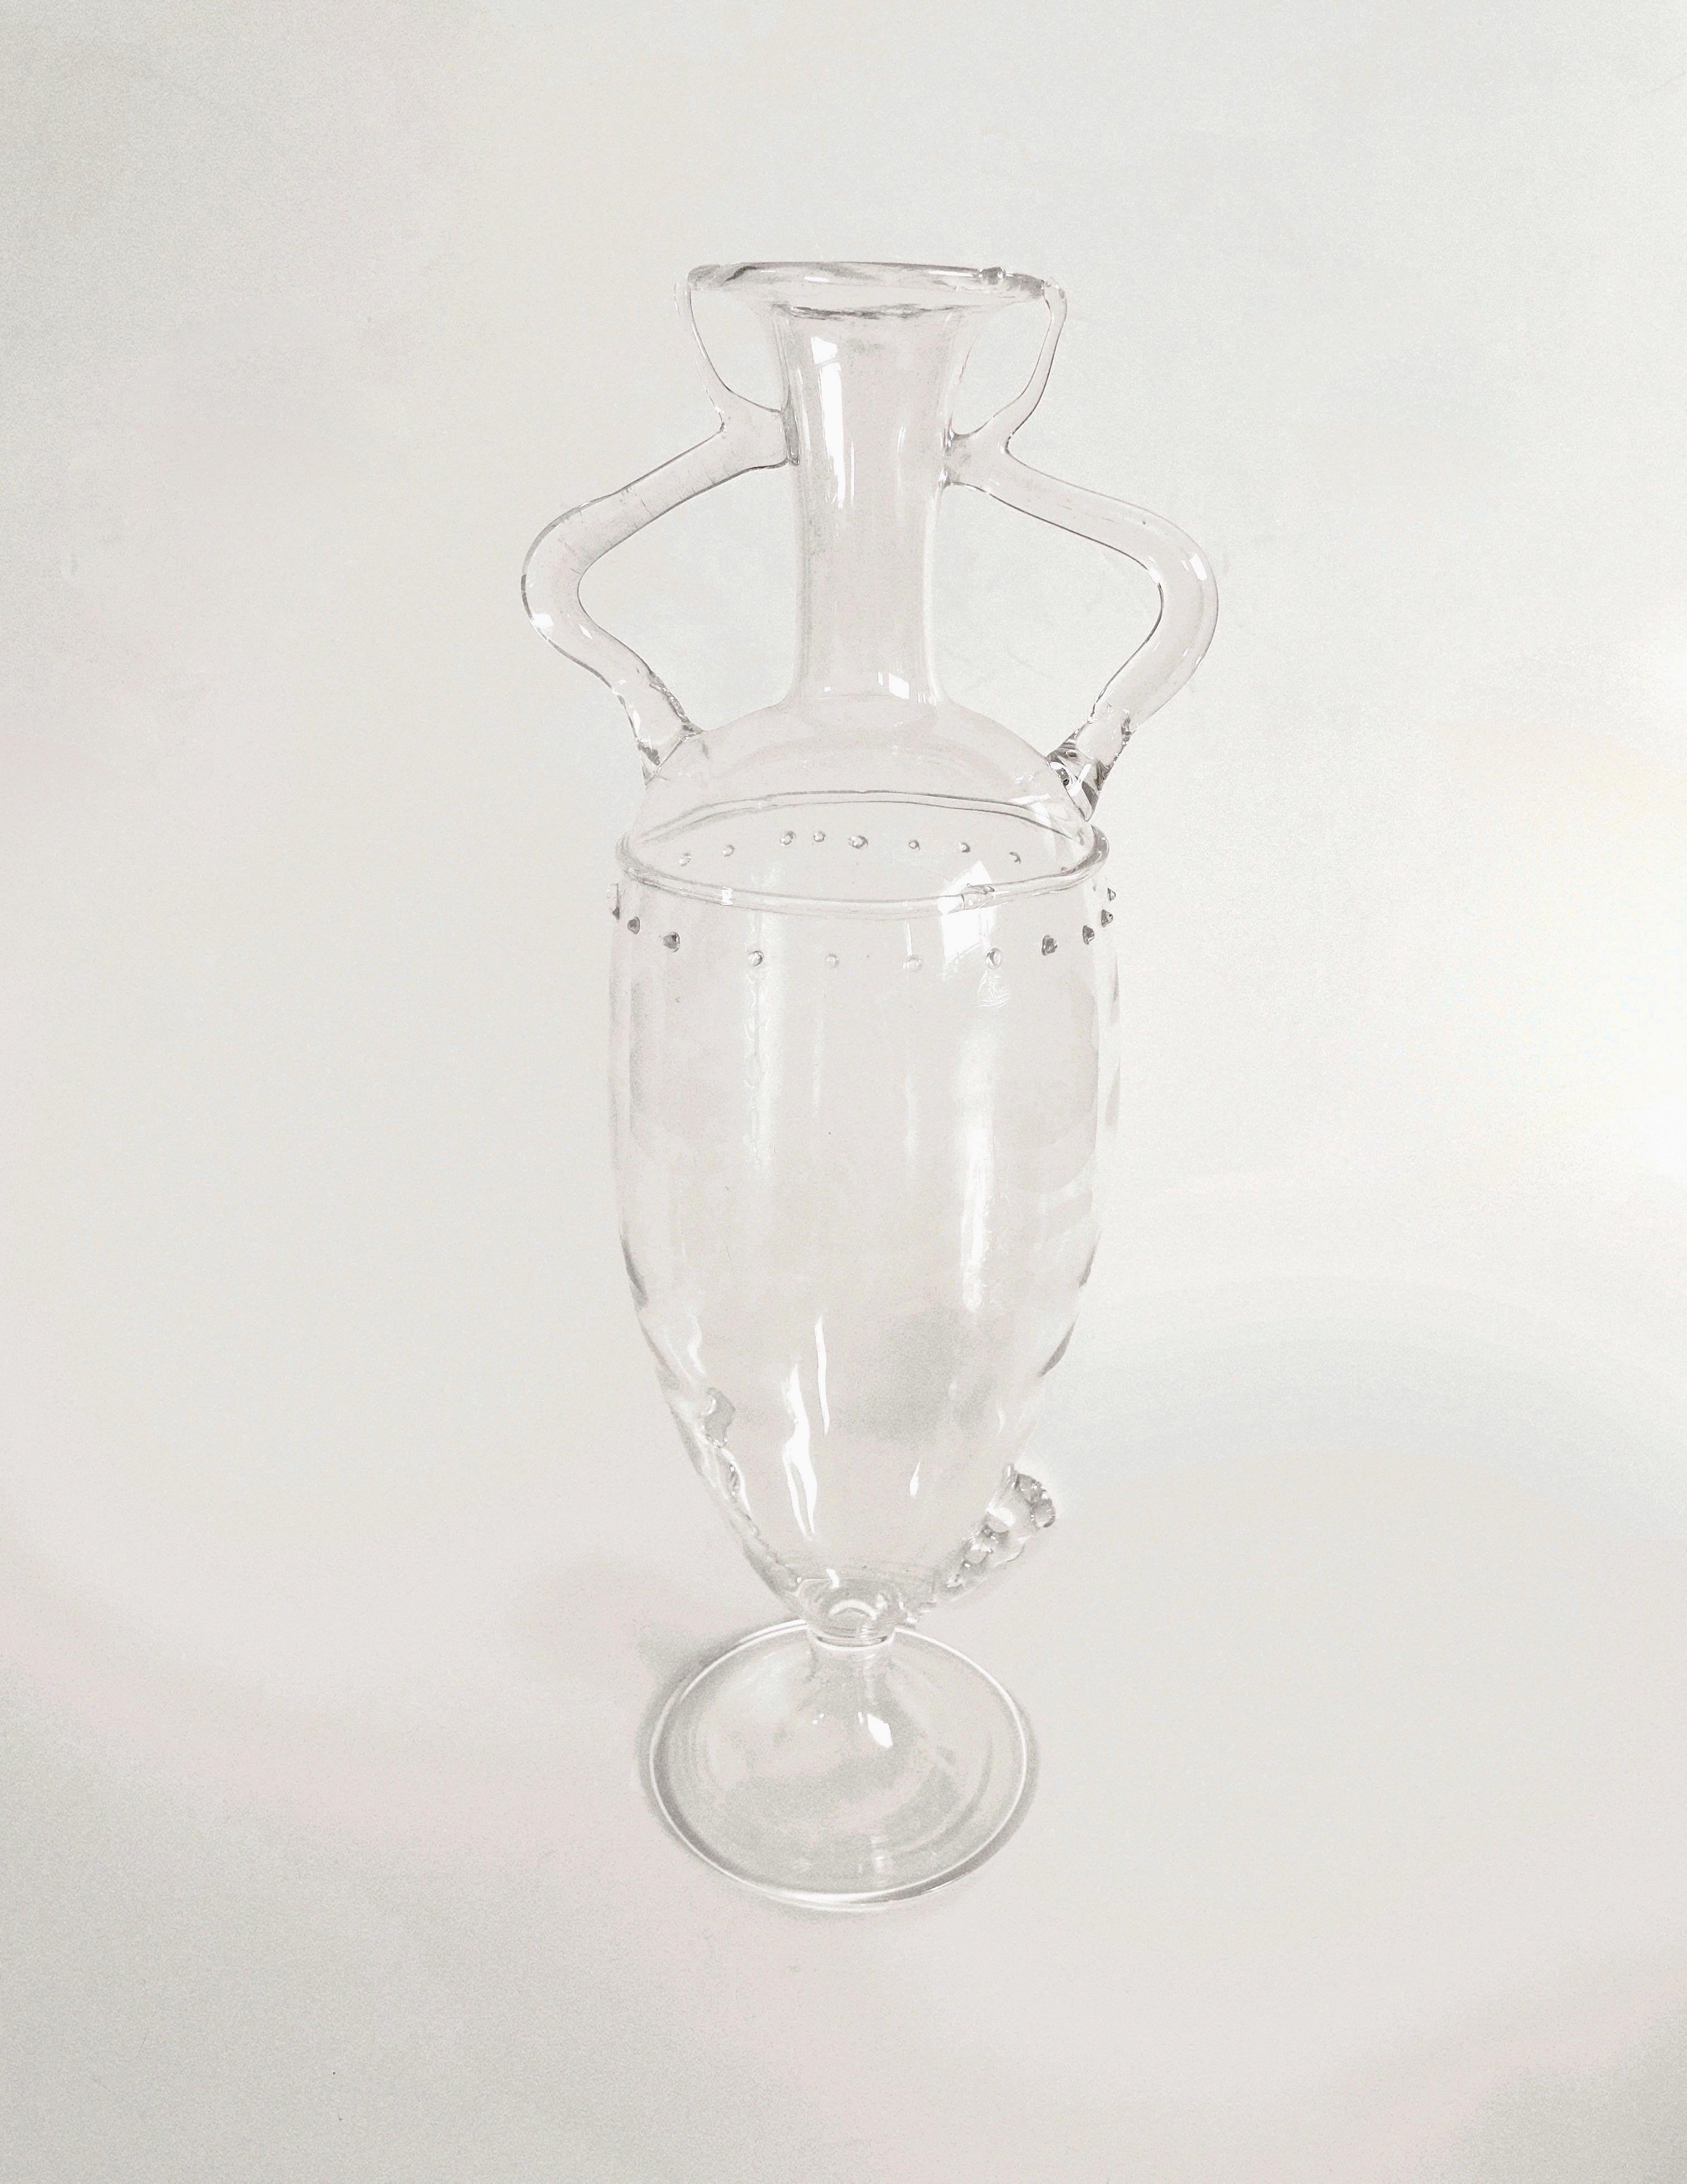 Delicate clear Murano glass vase by Vittorio Zecchin ca. 1930. Pristine condition, no chips or cracks. Price is for the one vase, partner vase available via separate listing.